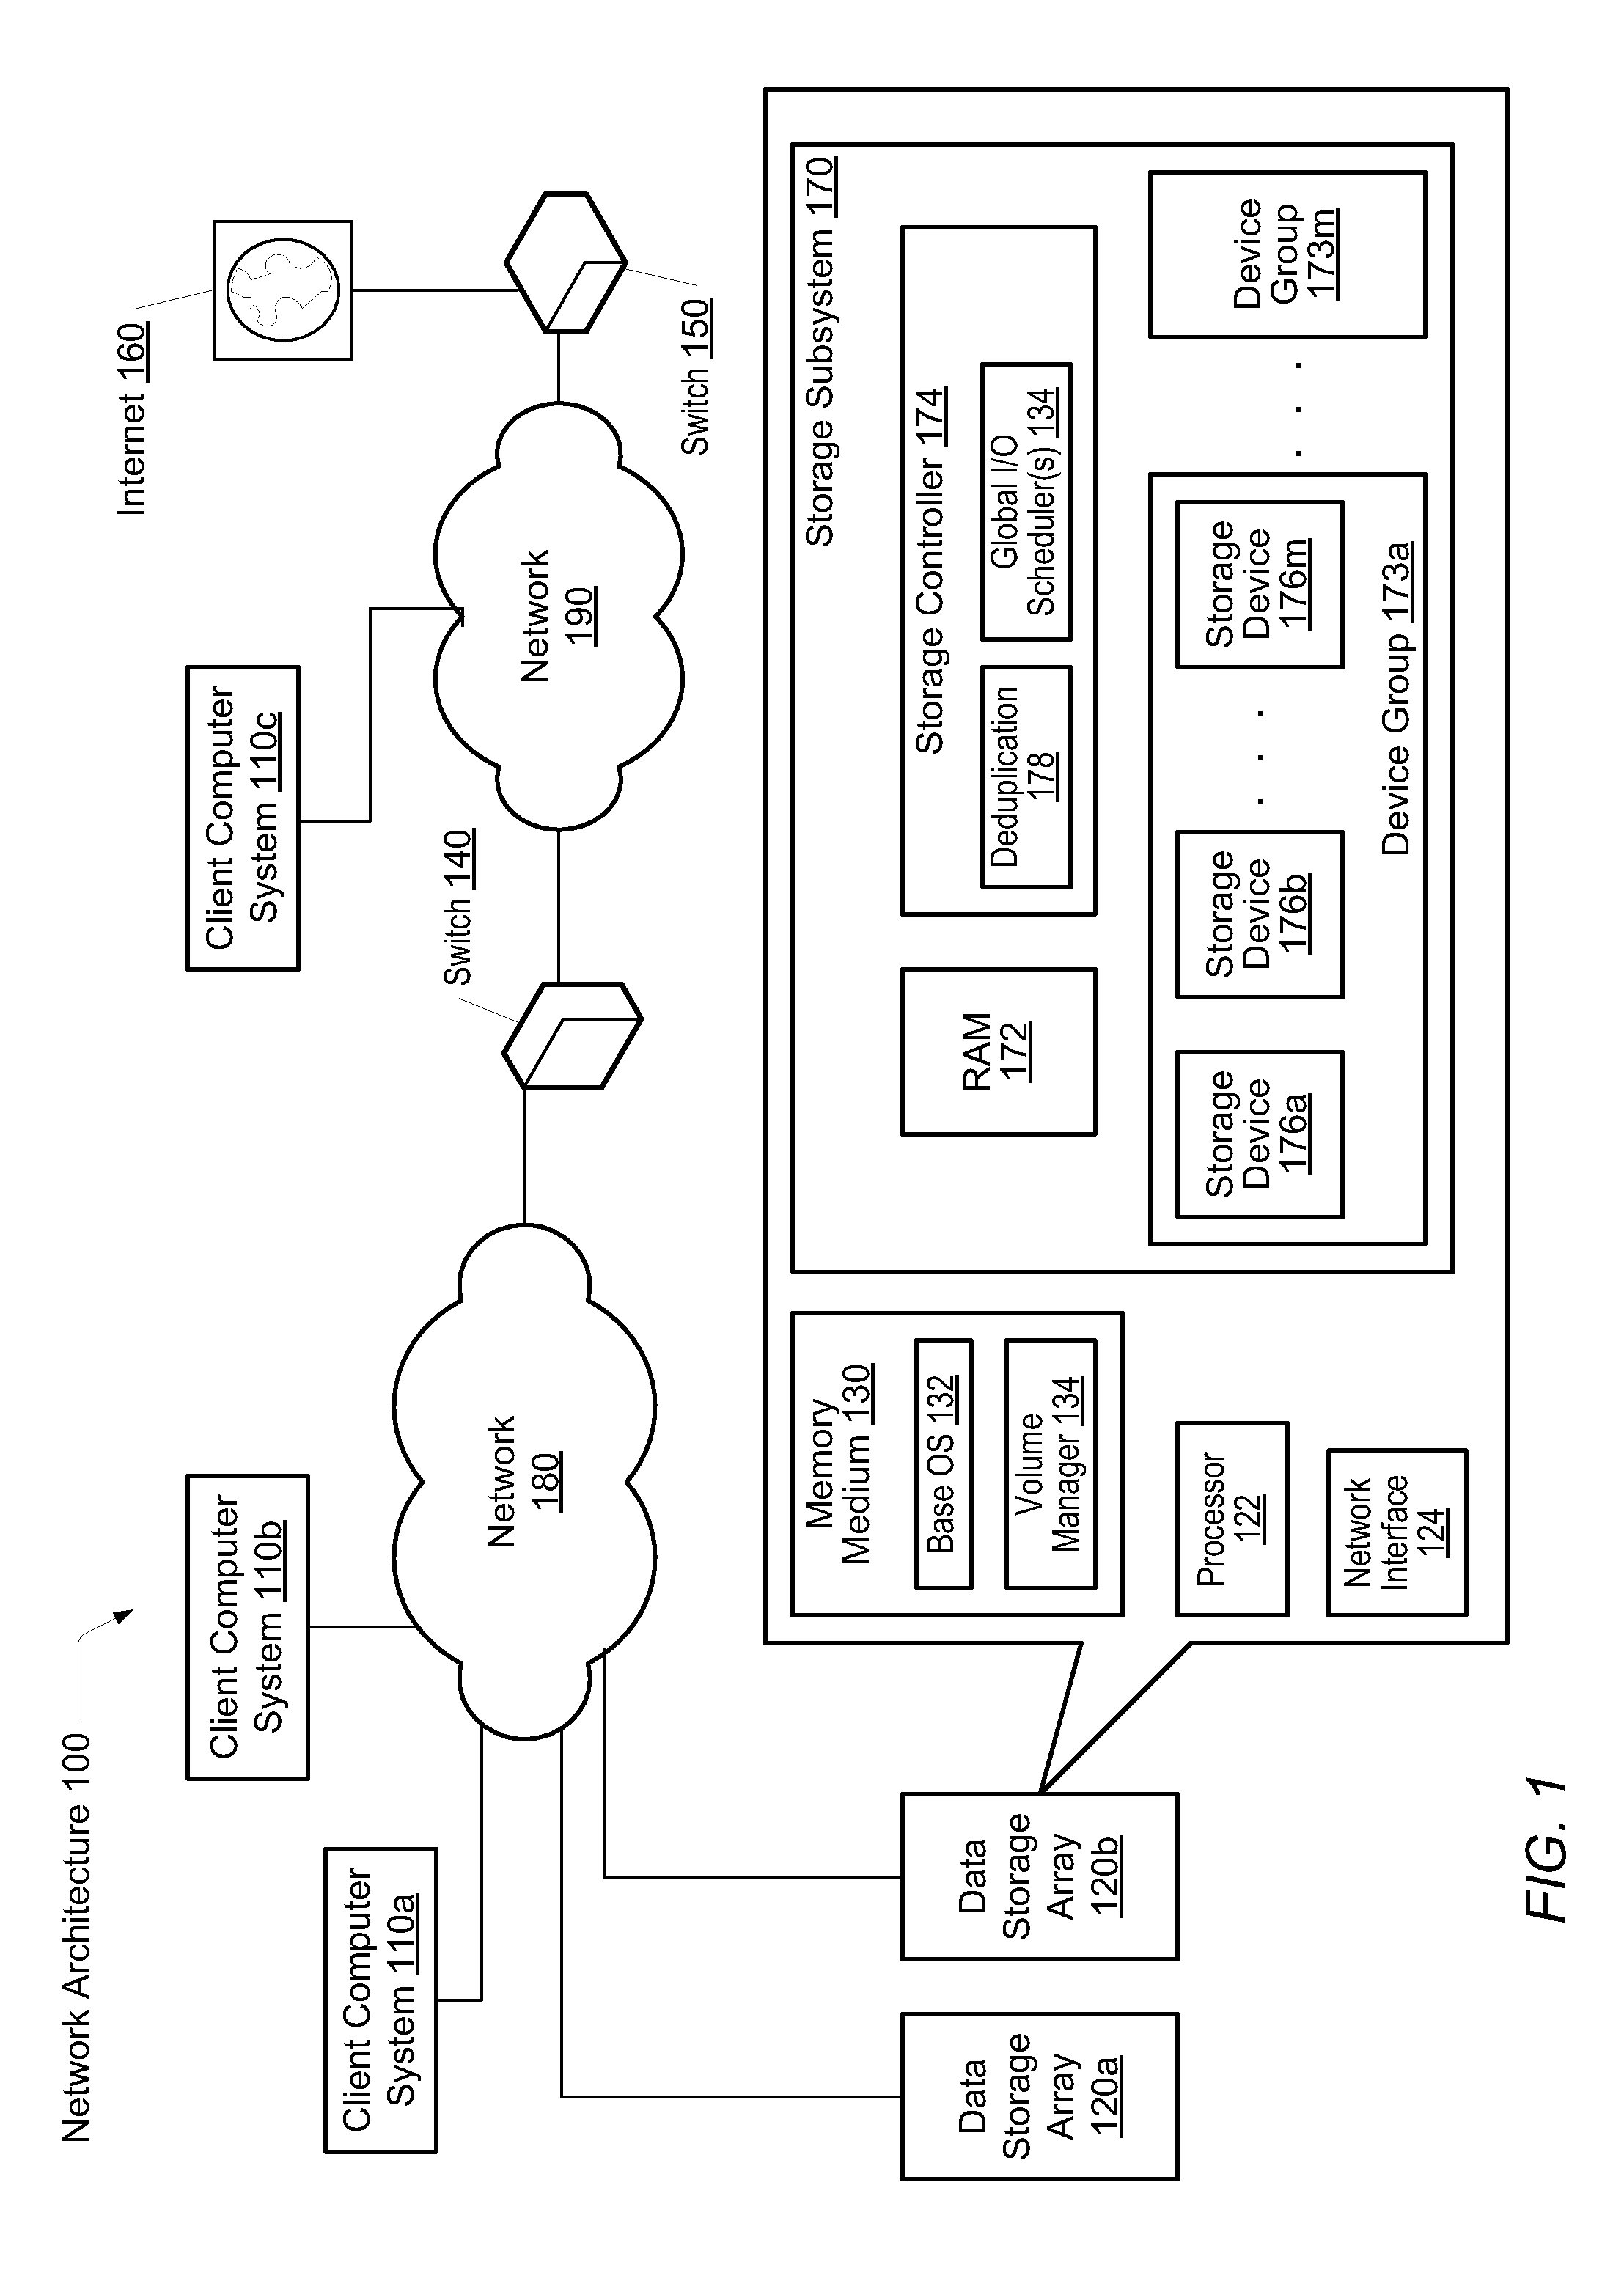 Logical sector mapping in a flash storage array